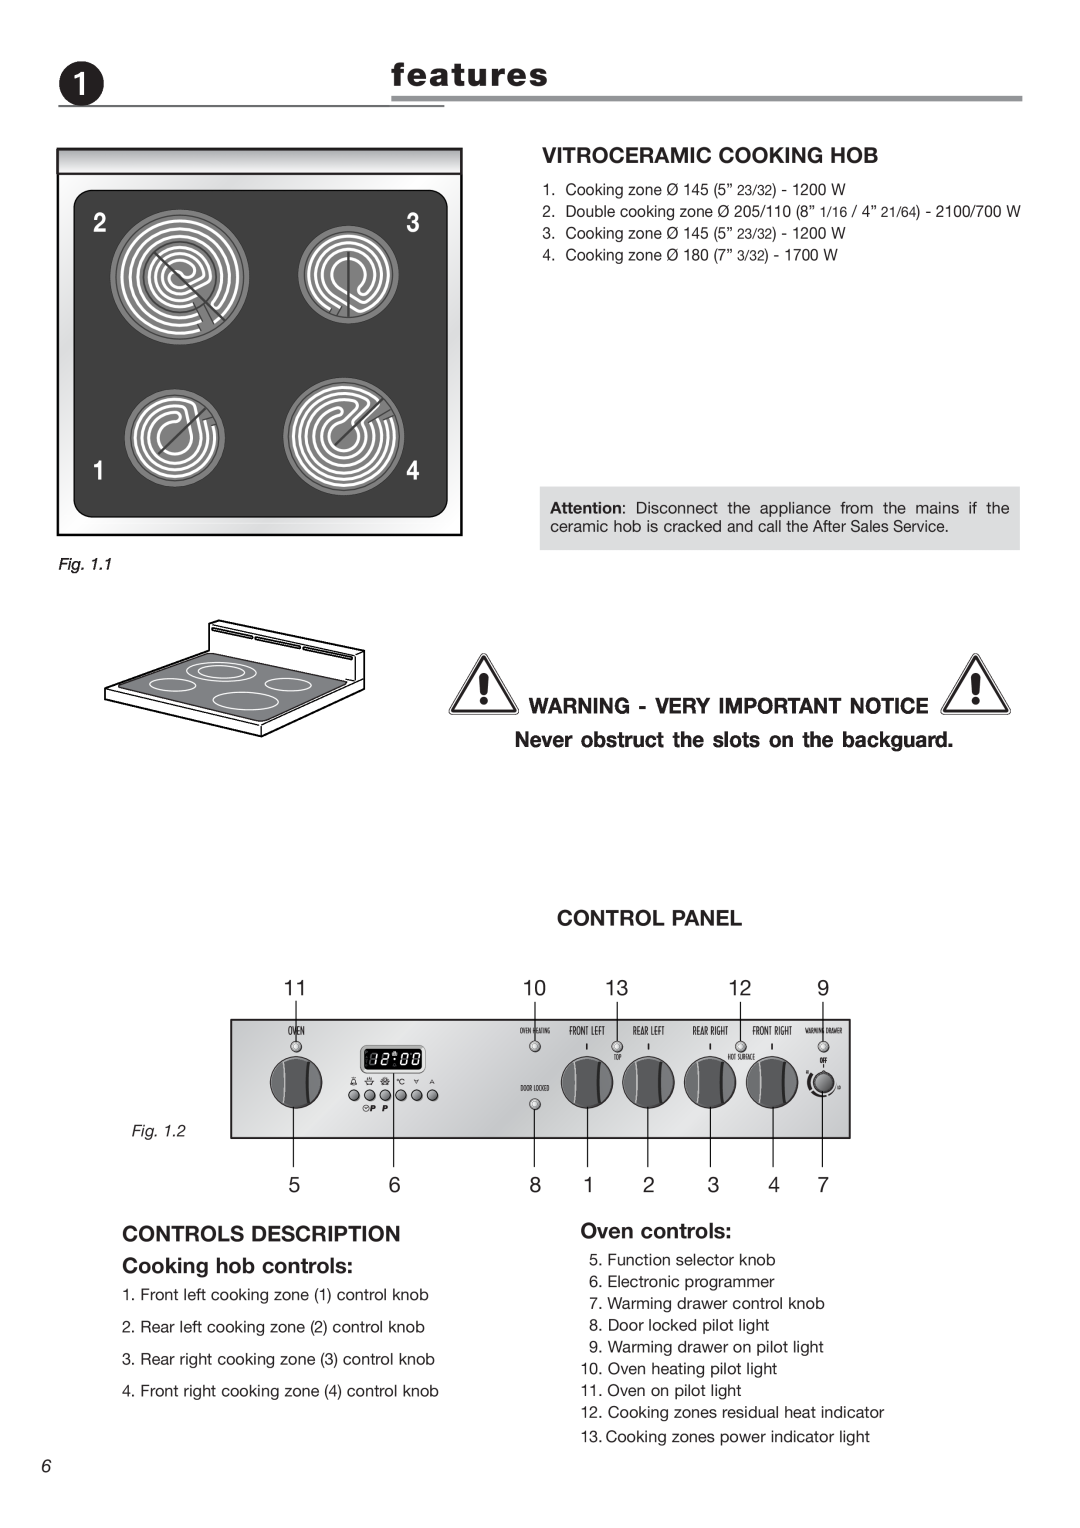 DeLonghi DEGLSC24SS warranty features, Vitroceramic Cooking Hob, Warning - Very Important Notice, Oven controls 